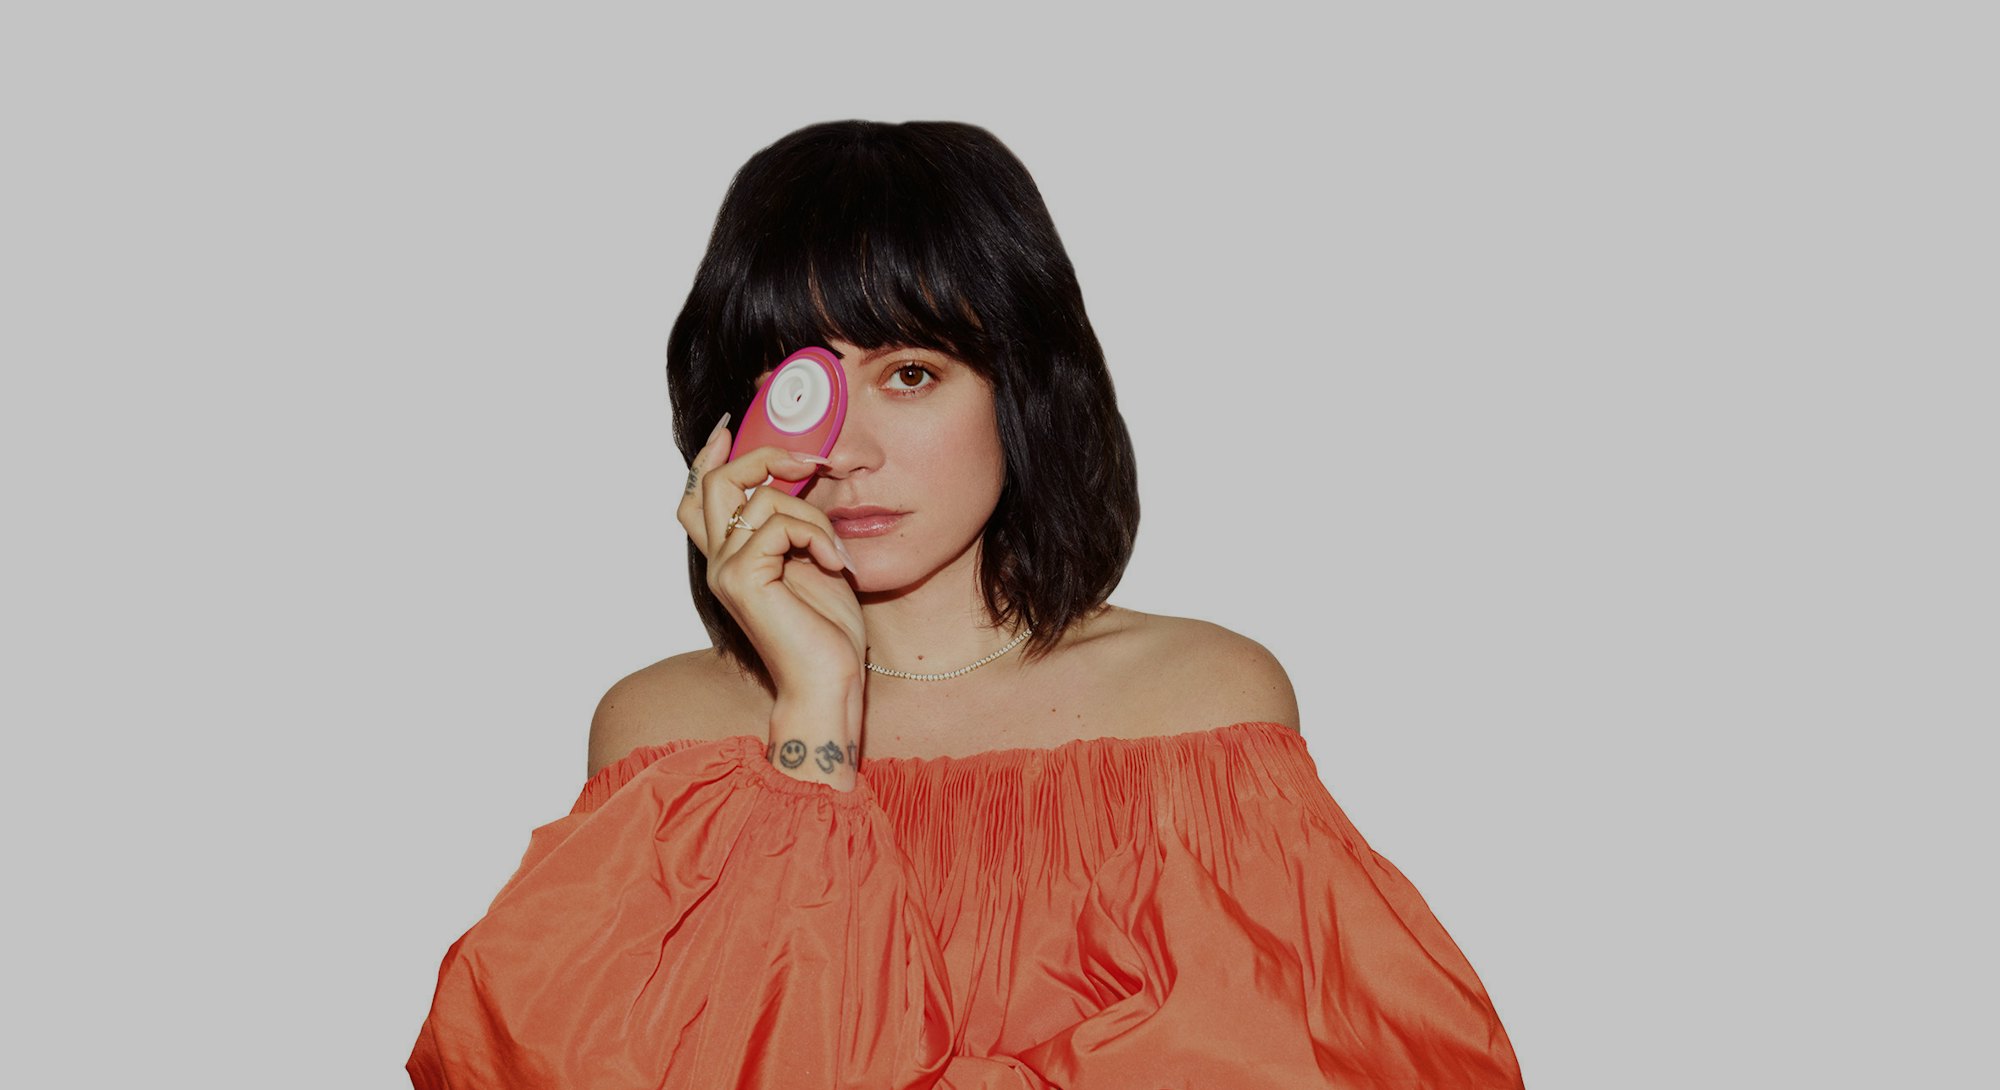 Singer Lily Allen poses with a Womanizer Liberty suction stimulator toy, holding it in front of her ...